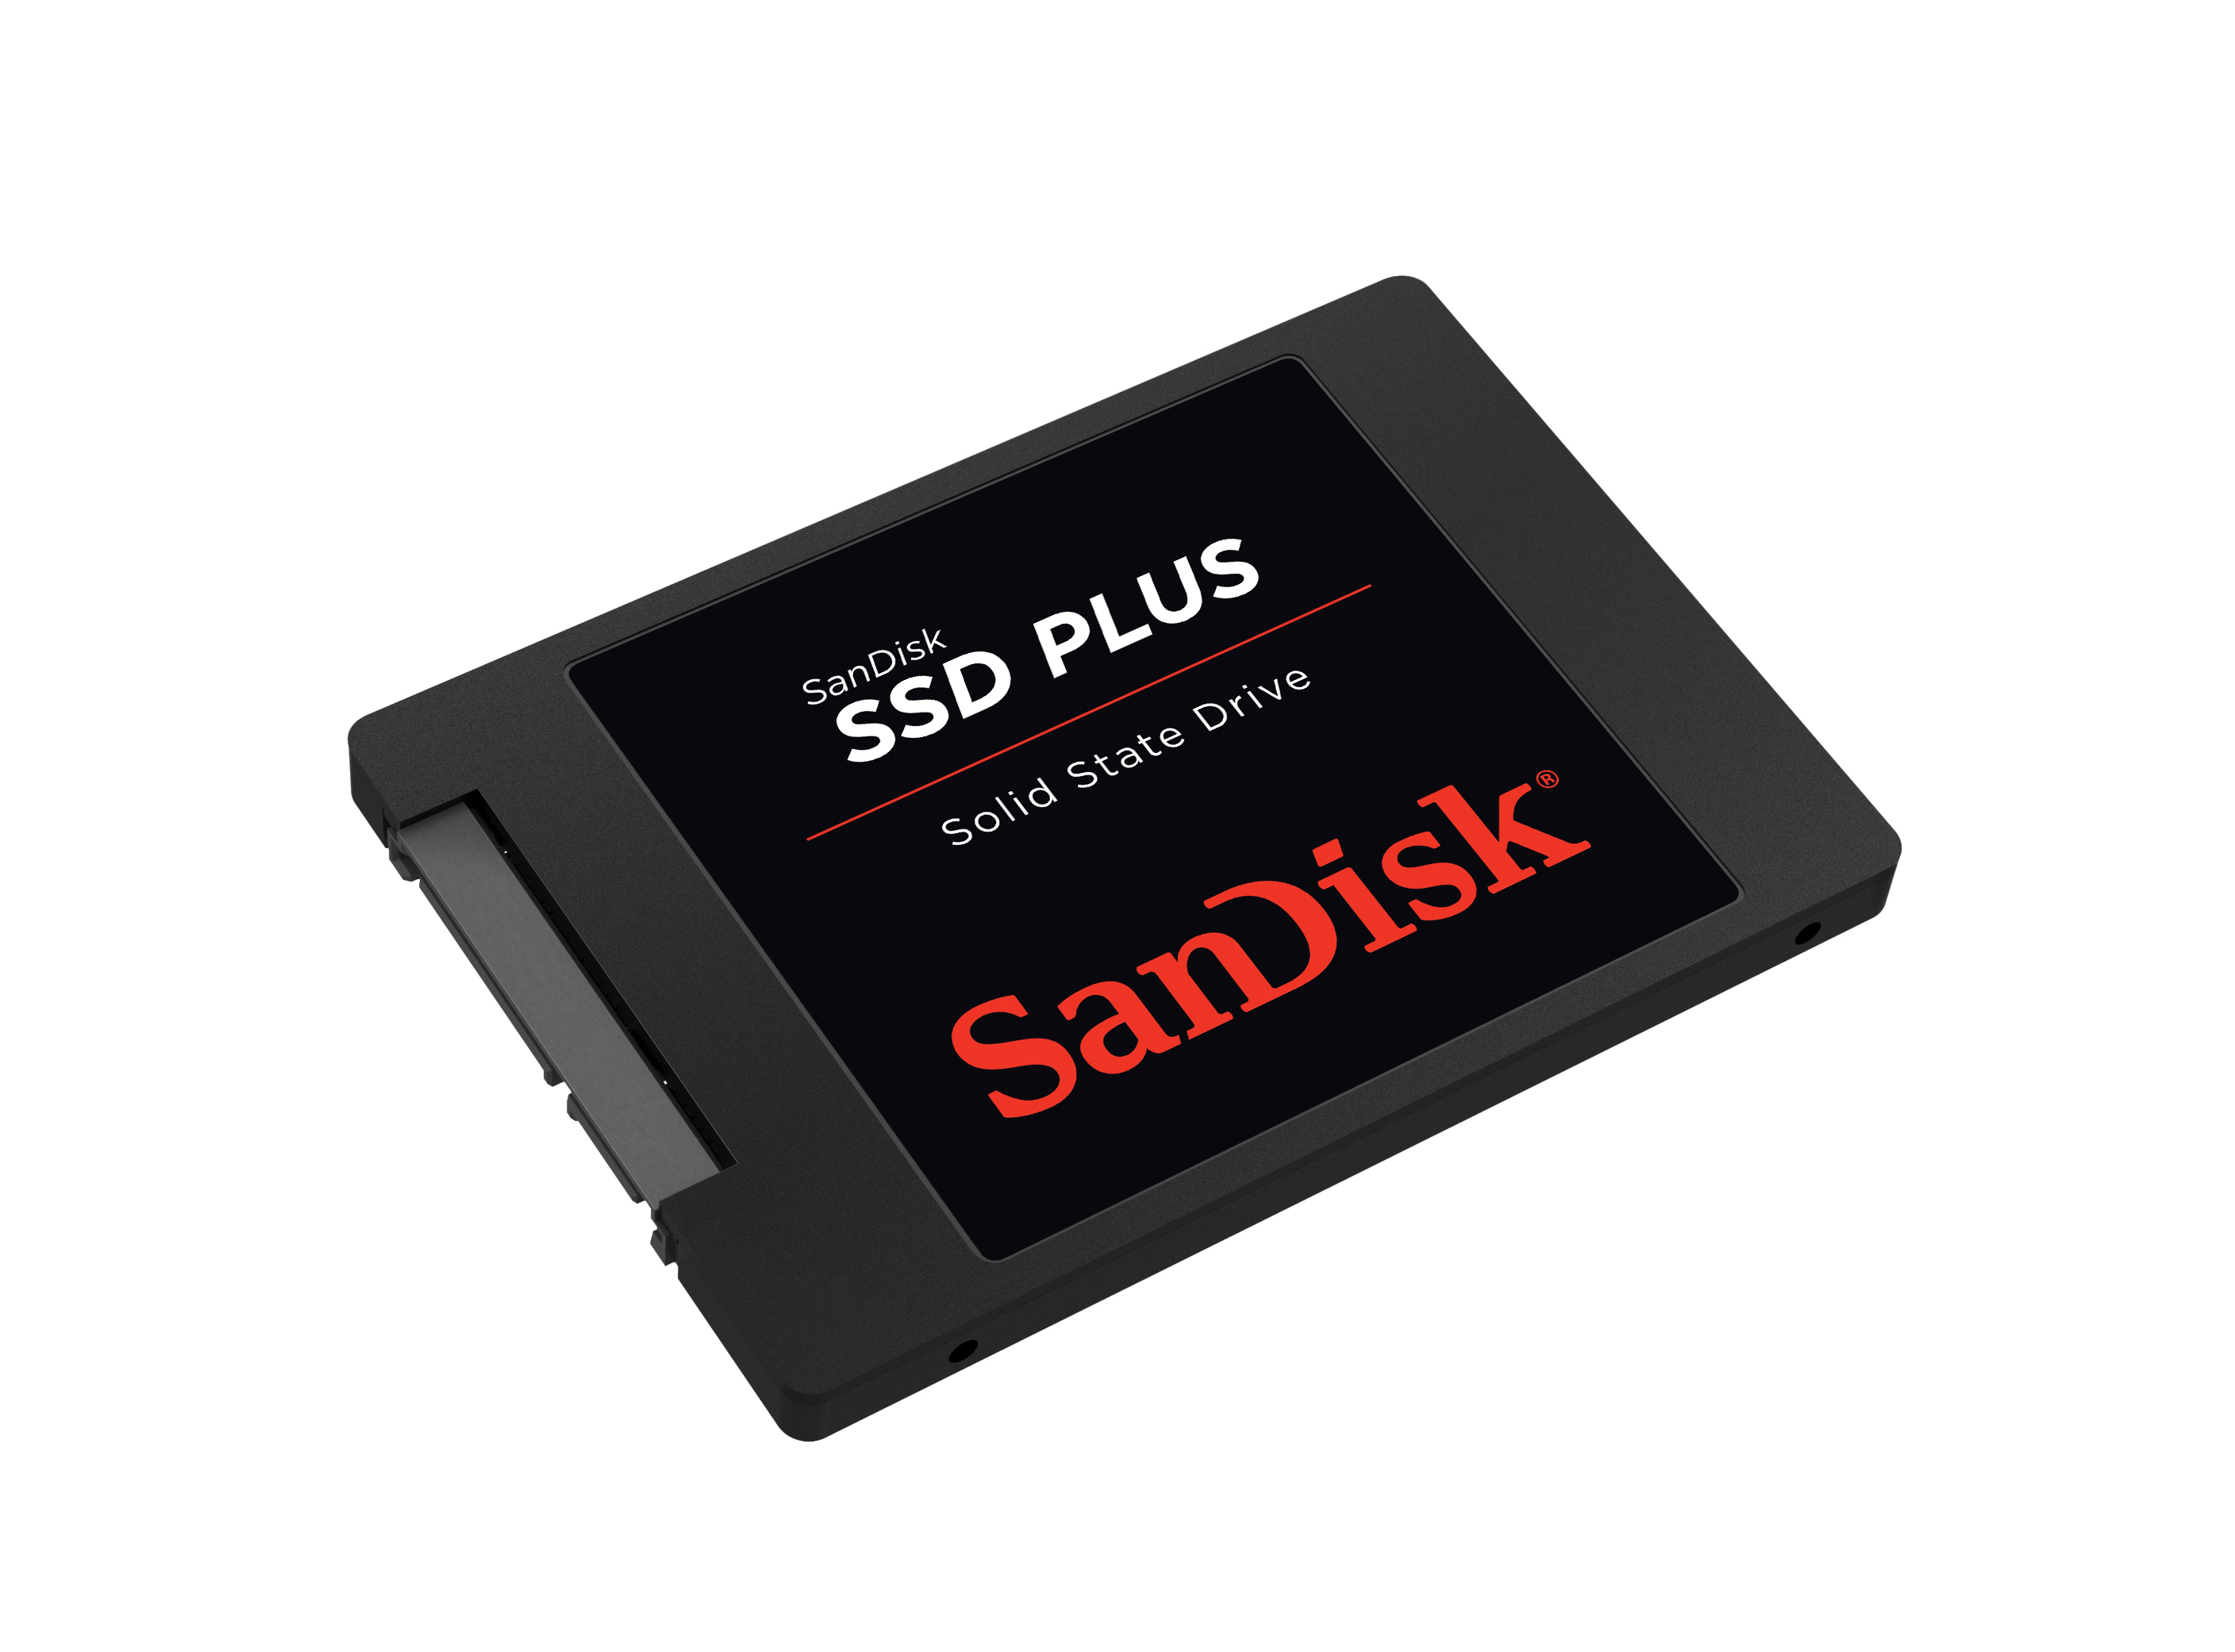 SanDisk New Affordable SSDs That Boost PC, Laptop or Tablet Performance | Business Wire